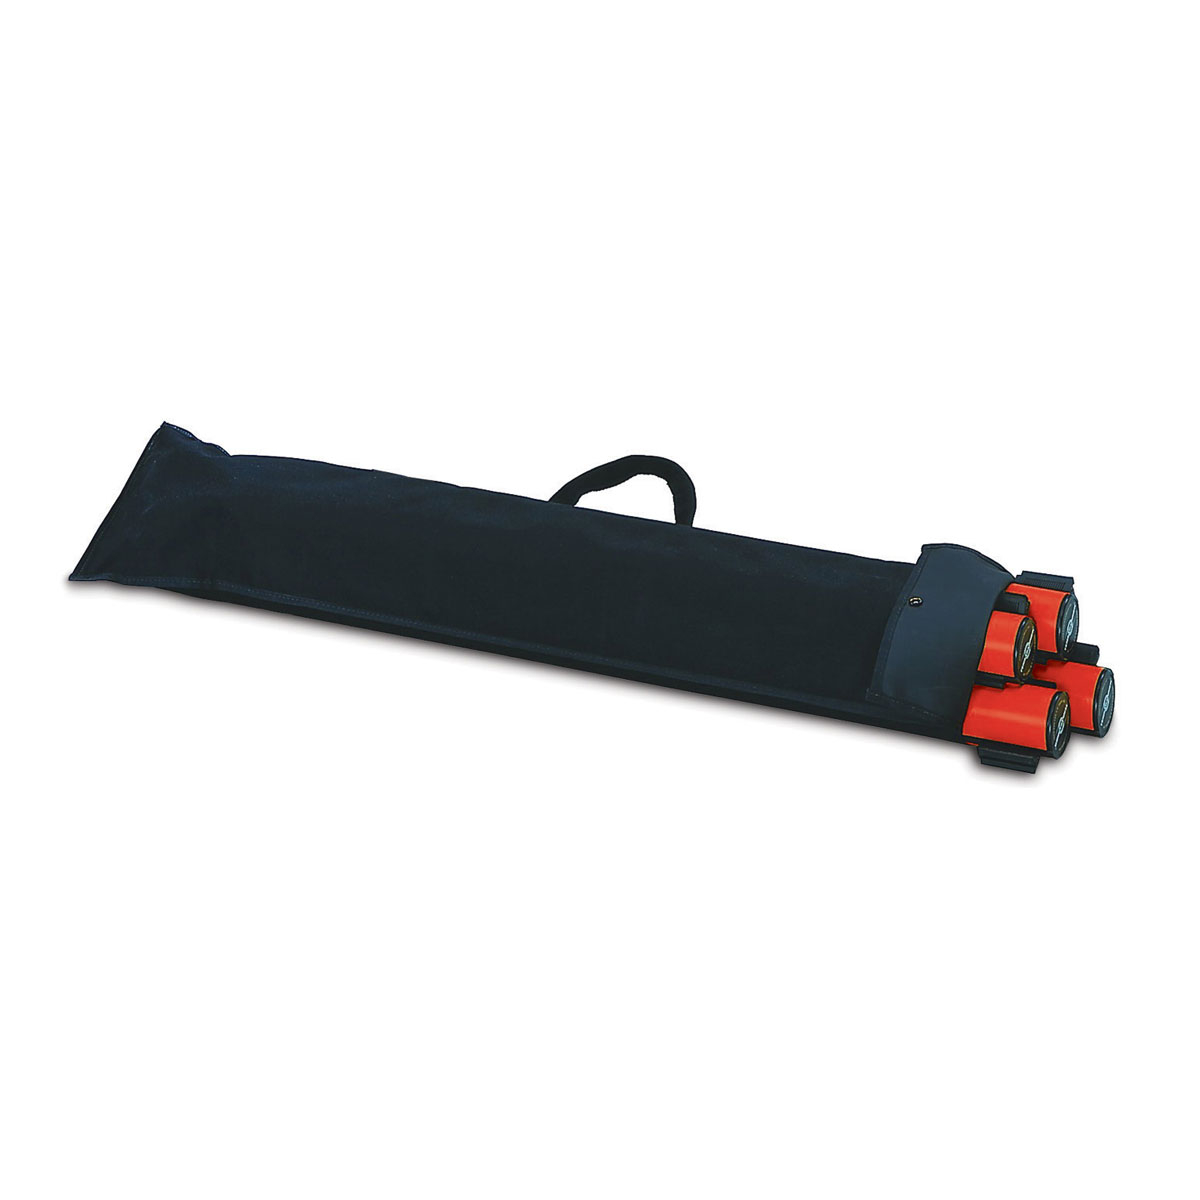 Tensabarrier® Stowaway Portable Safety Barrier Kit Includes a Black Nylon Carry Bag to Aid Transportation - Nt Included With Single Posts